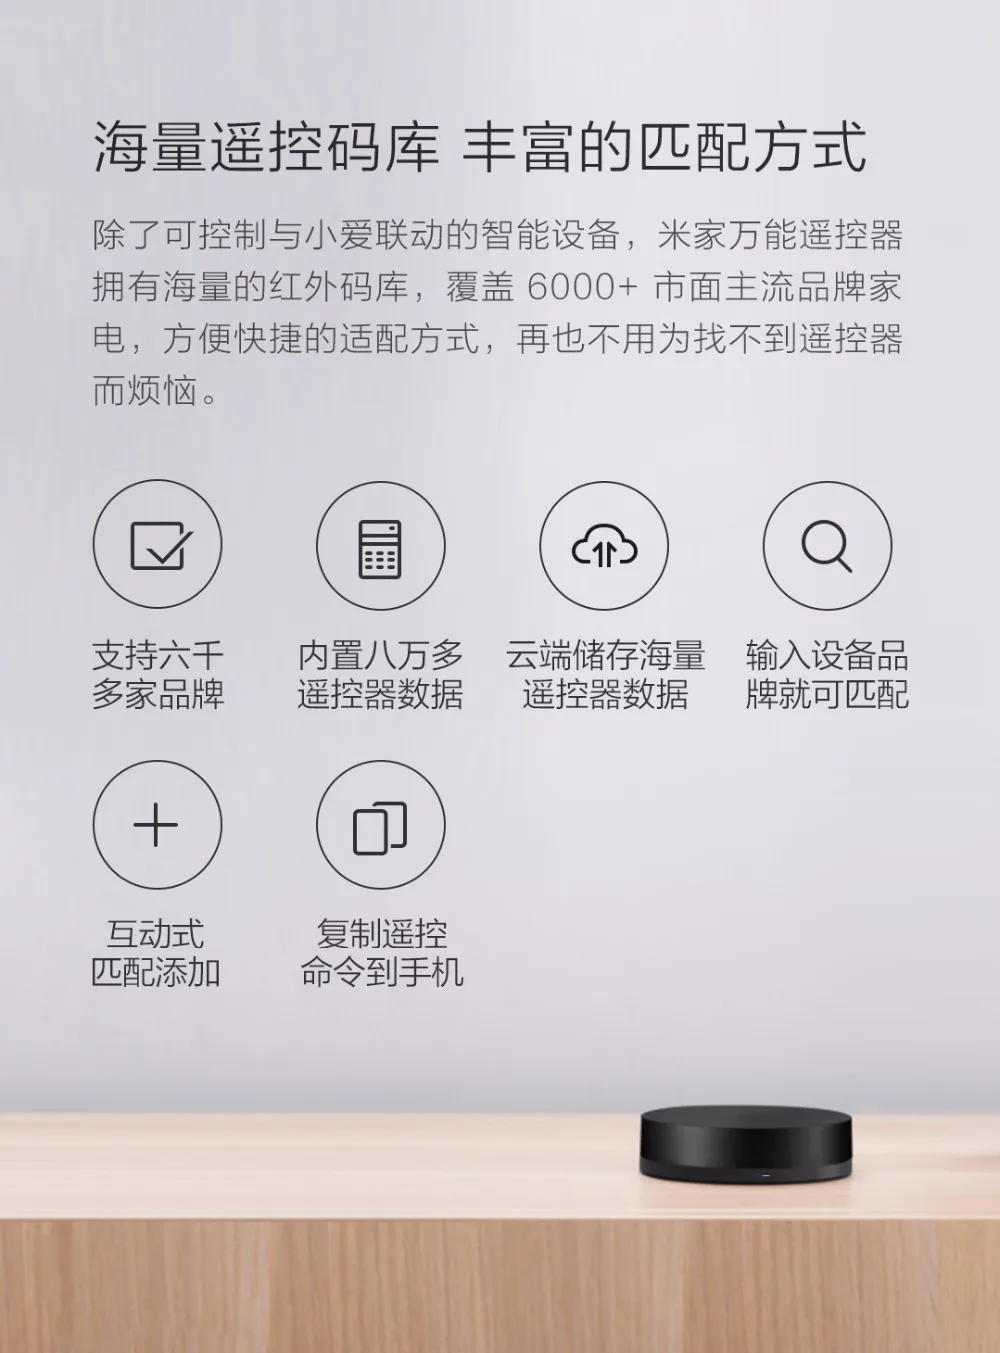 2019 Update Xiaomi Universal Infrared Remote Controller Versatile Wifi Control For IR Home Appliance Air Conditioner Warmer TV (8)